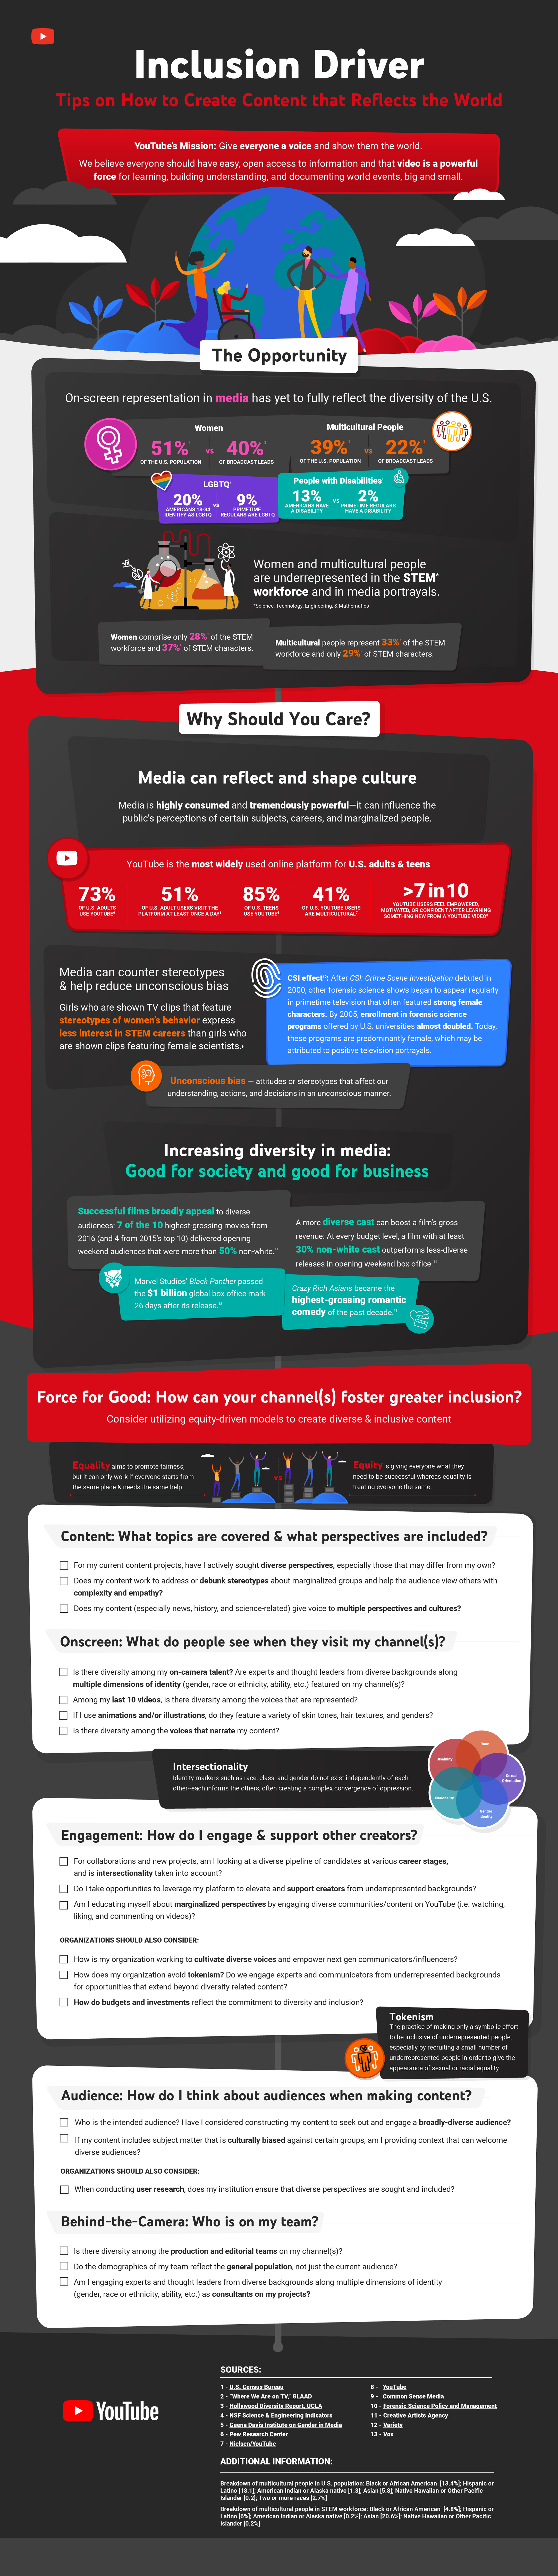 , YouTube Provides Tips on How to Create More Inclusive Content [Infographic], TornCRM